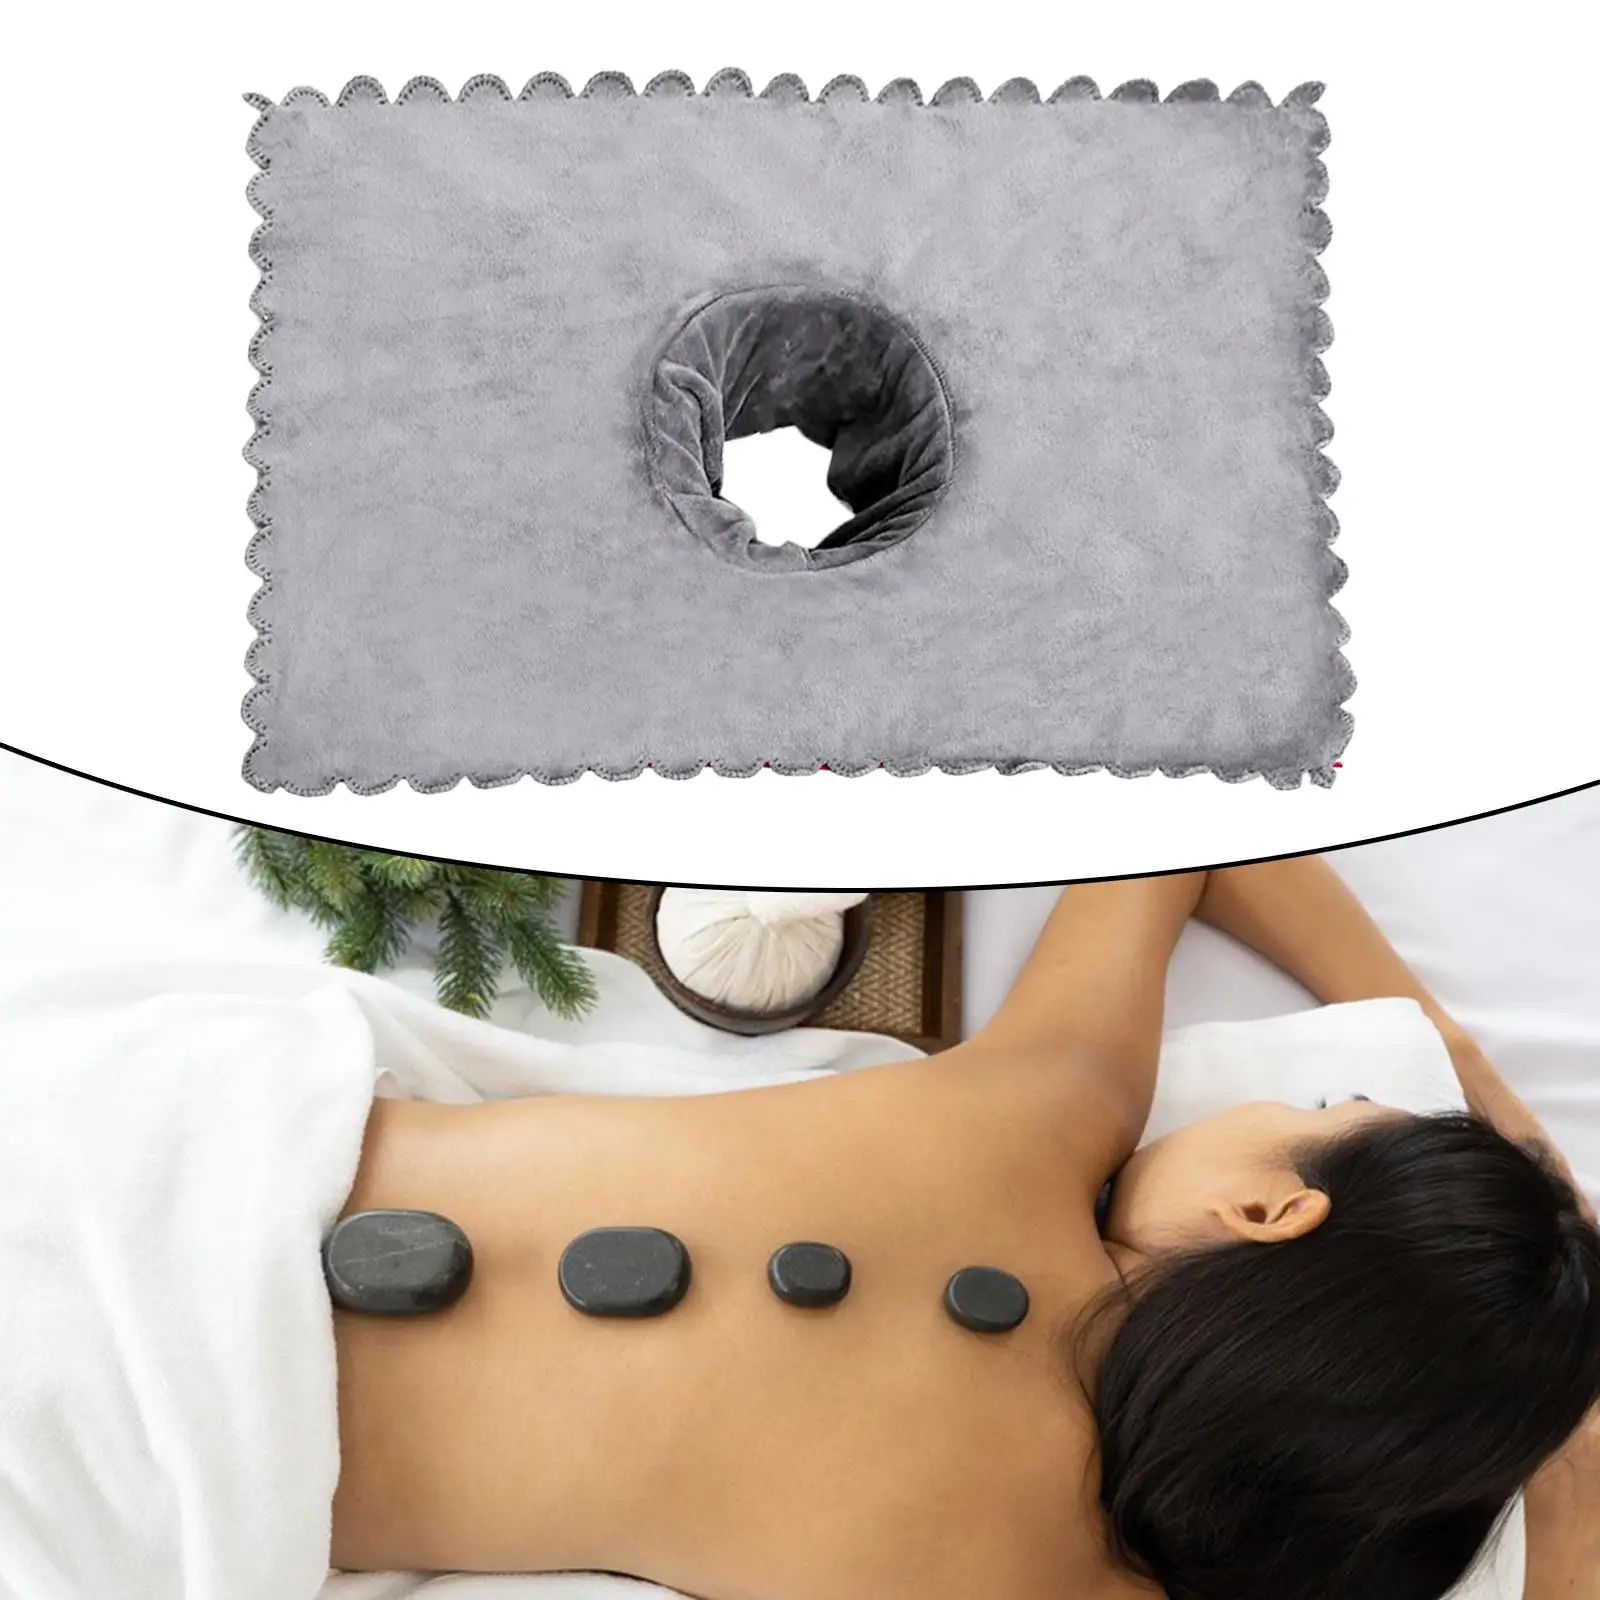 Massage Table Sheet Covers with Face Breath Hole// Soft